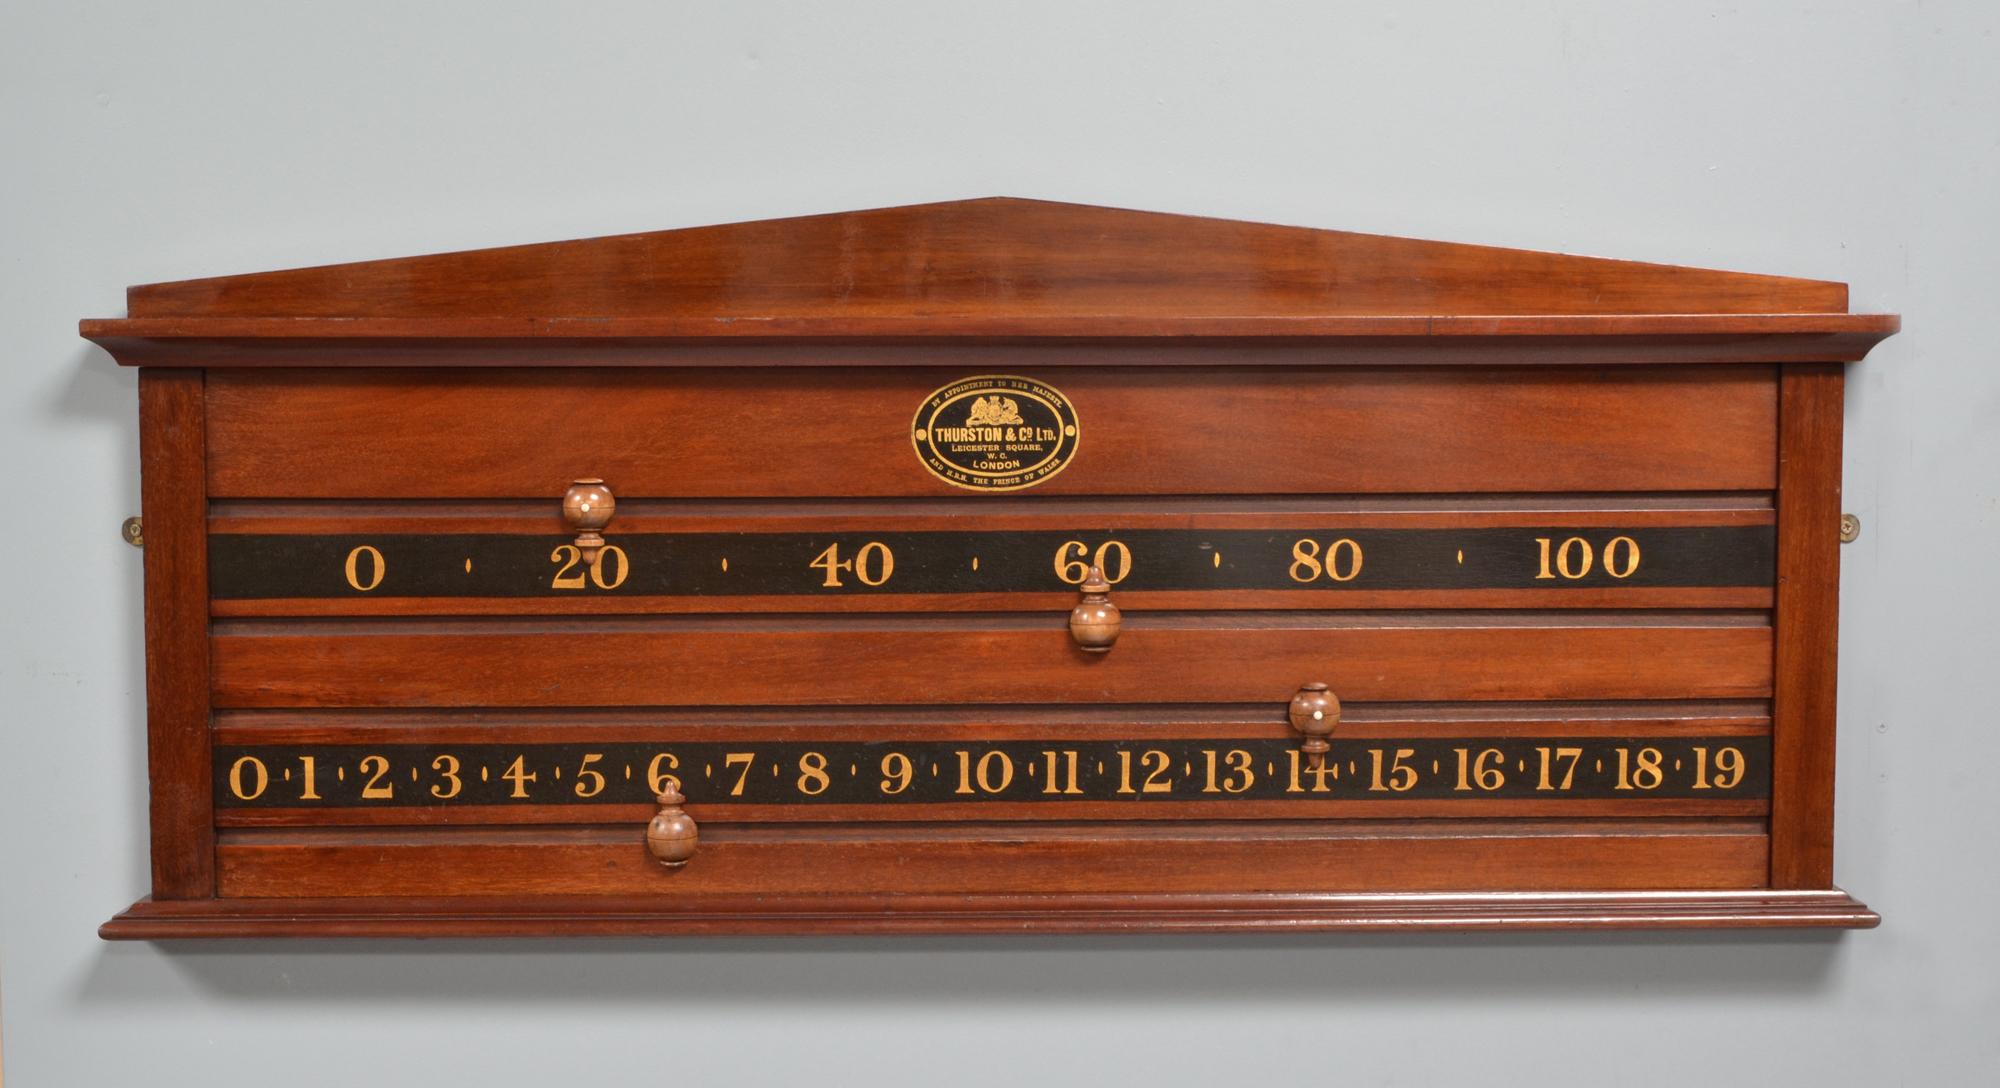 A mahogany framed billiards or snooker scoring board by Thurston of London circa 1895 with a shaped pediment.
A very nice cut of mahogany with boxwood sliding markers allowing each player to score up to 119 points.
The original makers transfer is